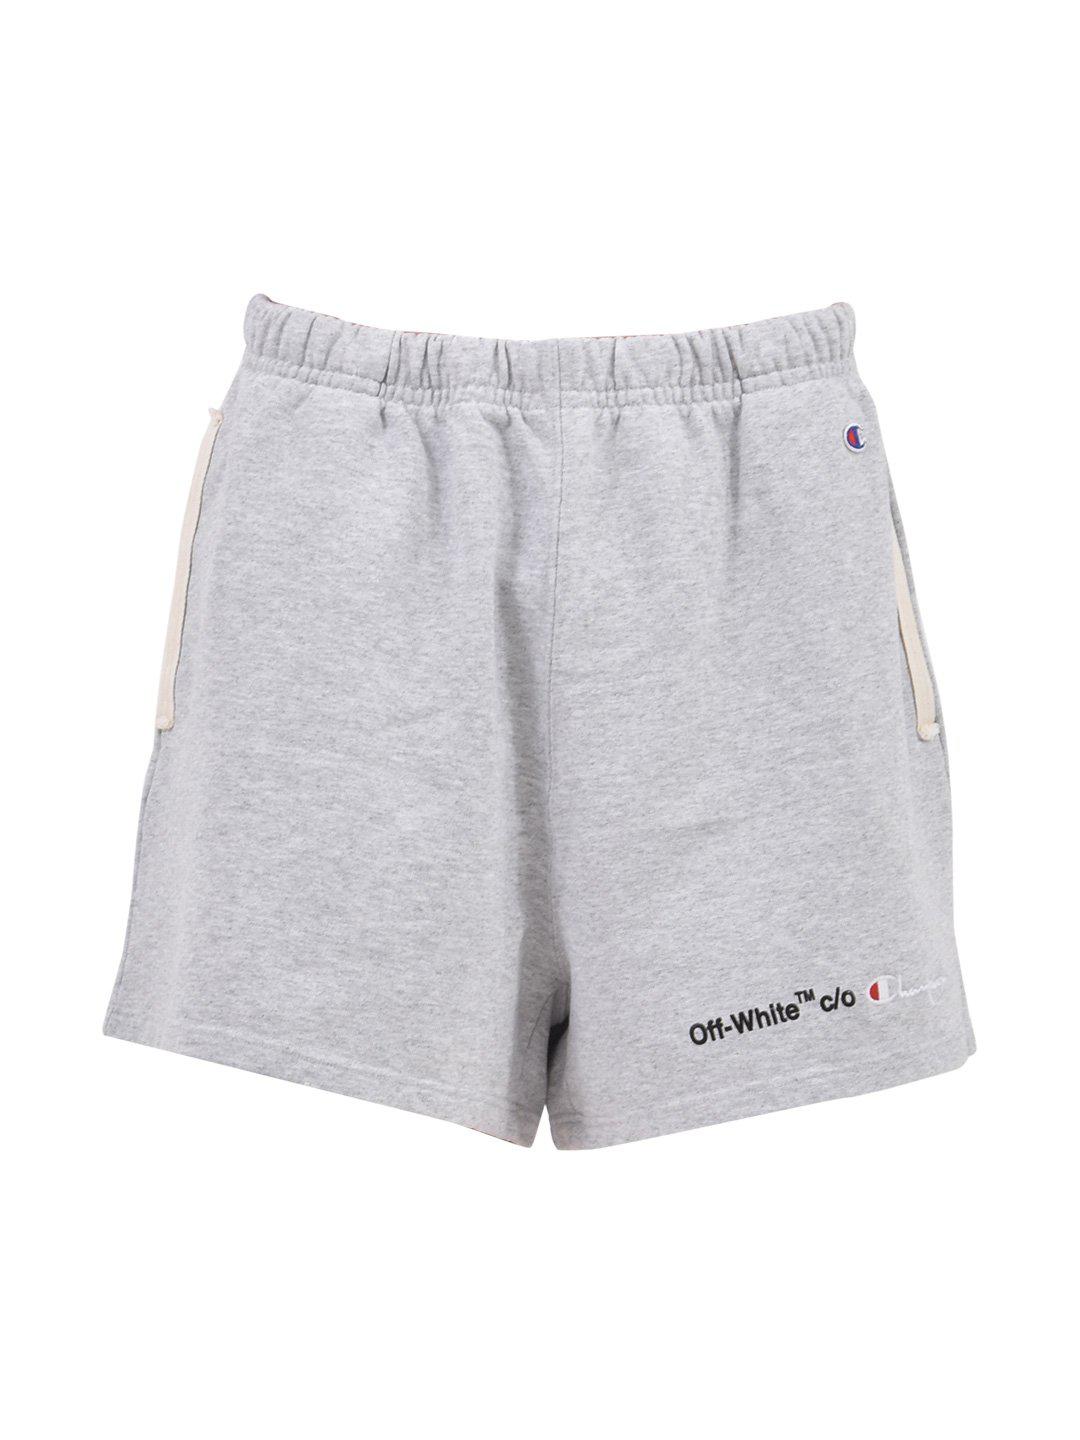 Off-White c/o Virgil Abloh X Champion Shorts in Gray | Lyst